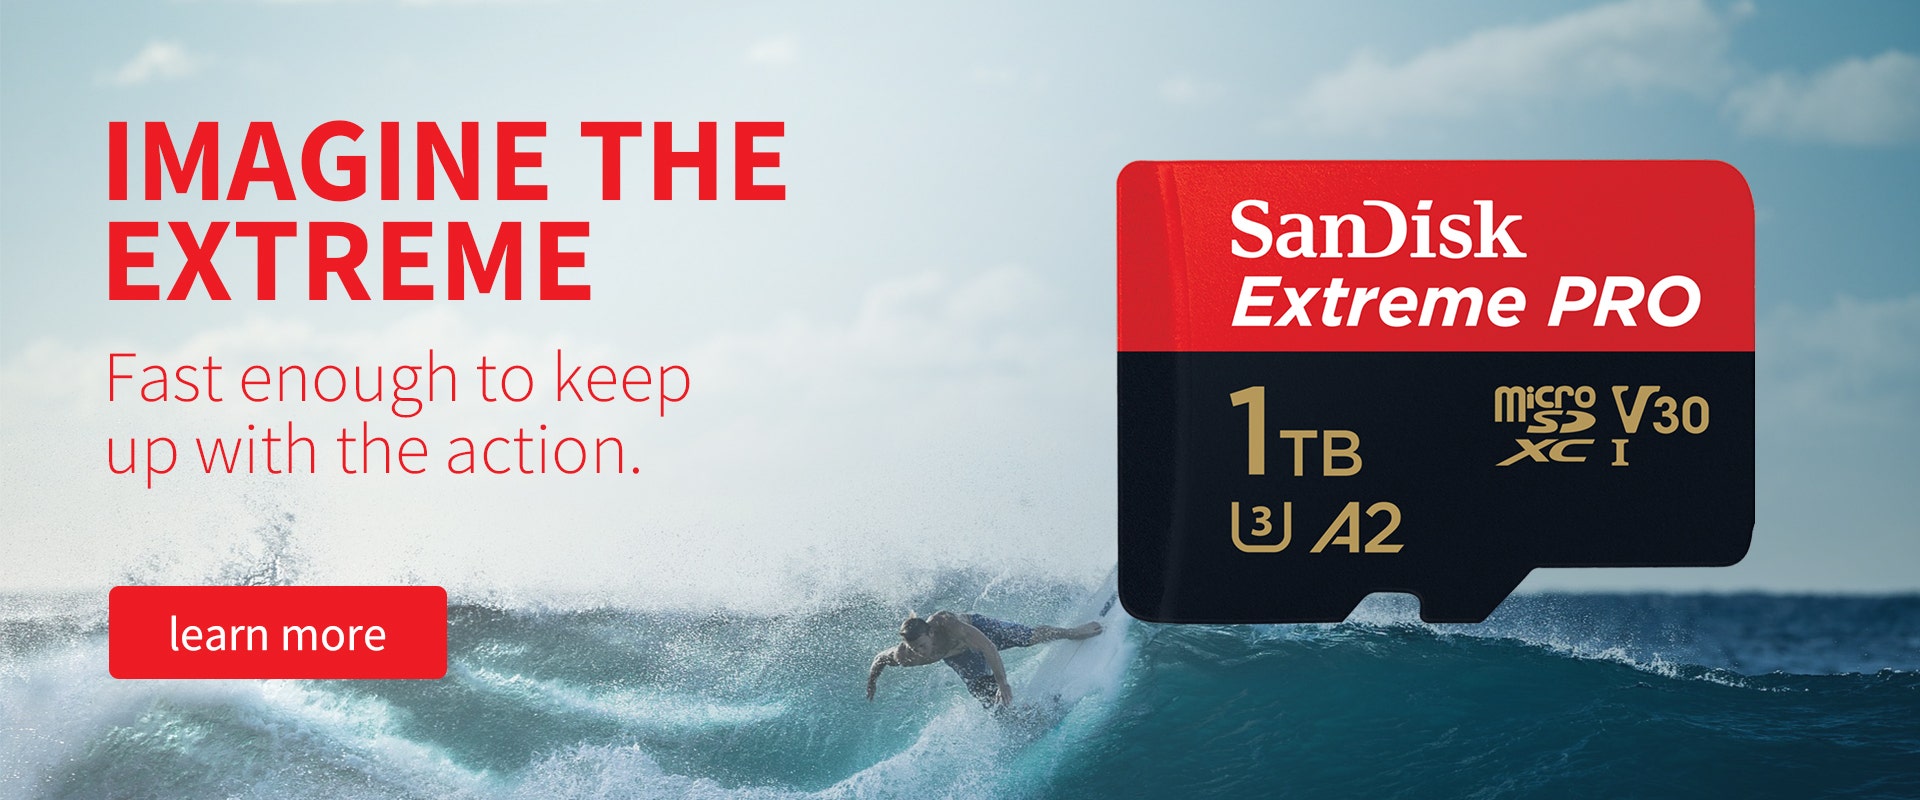 SanDisk providing the extreme solutions to your problems.